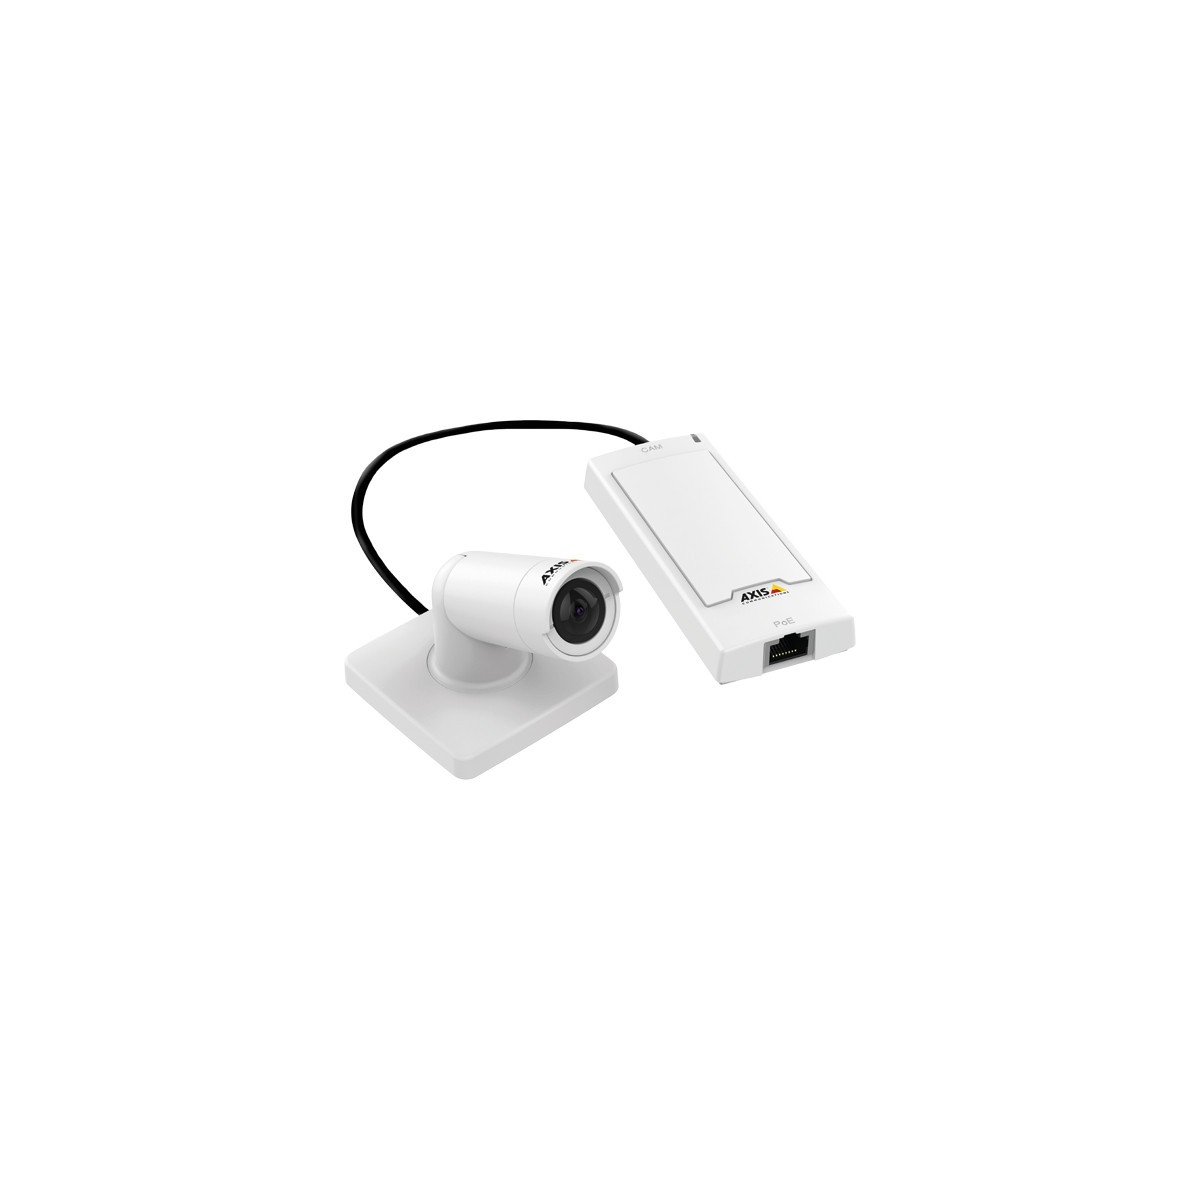 Axis P1254 - IP security camera - Indoor - Wired - Bullet - Ceiling-wall - White